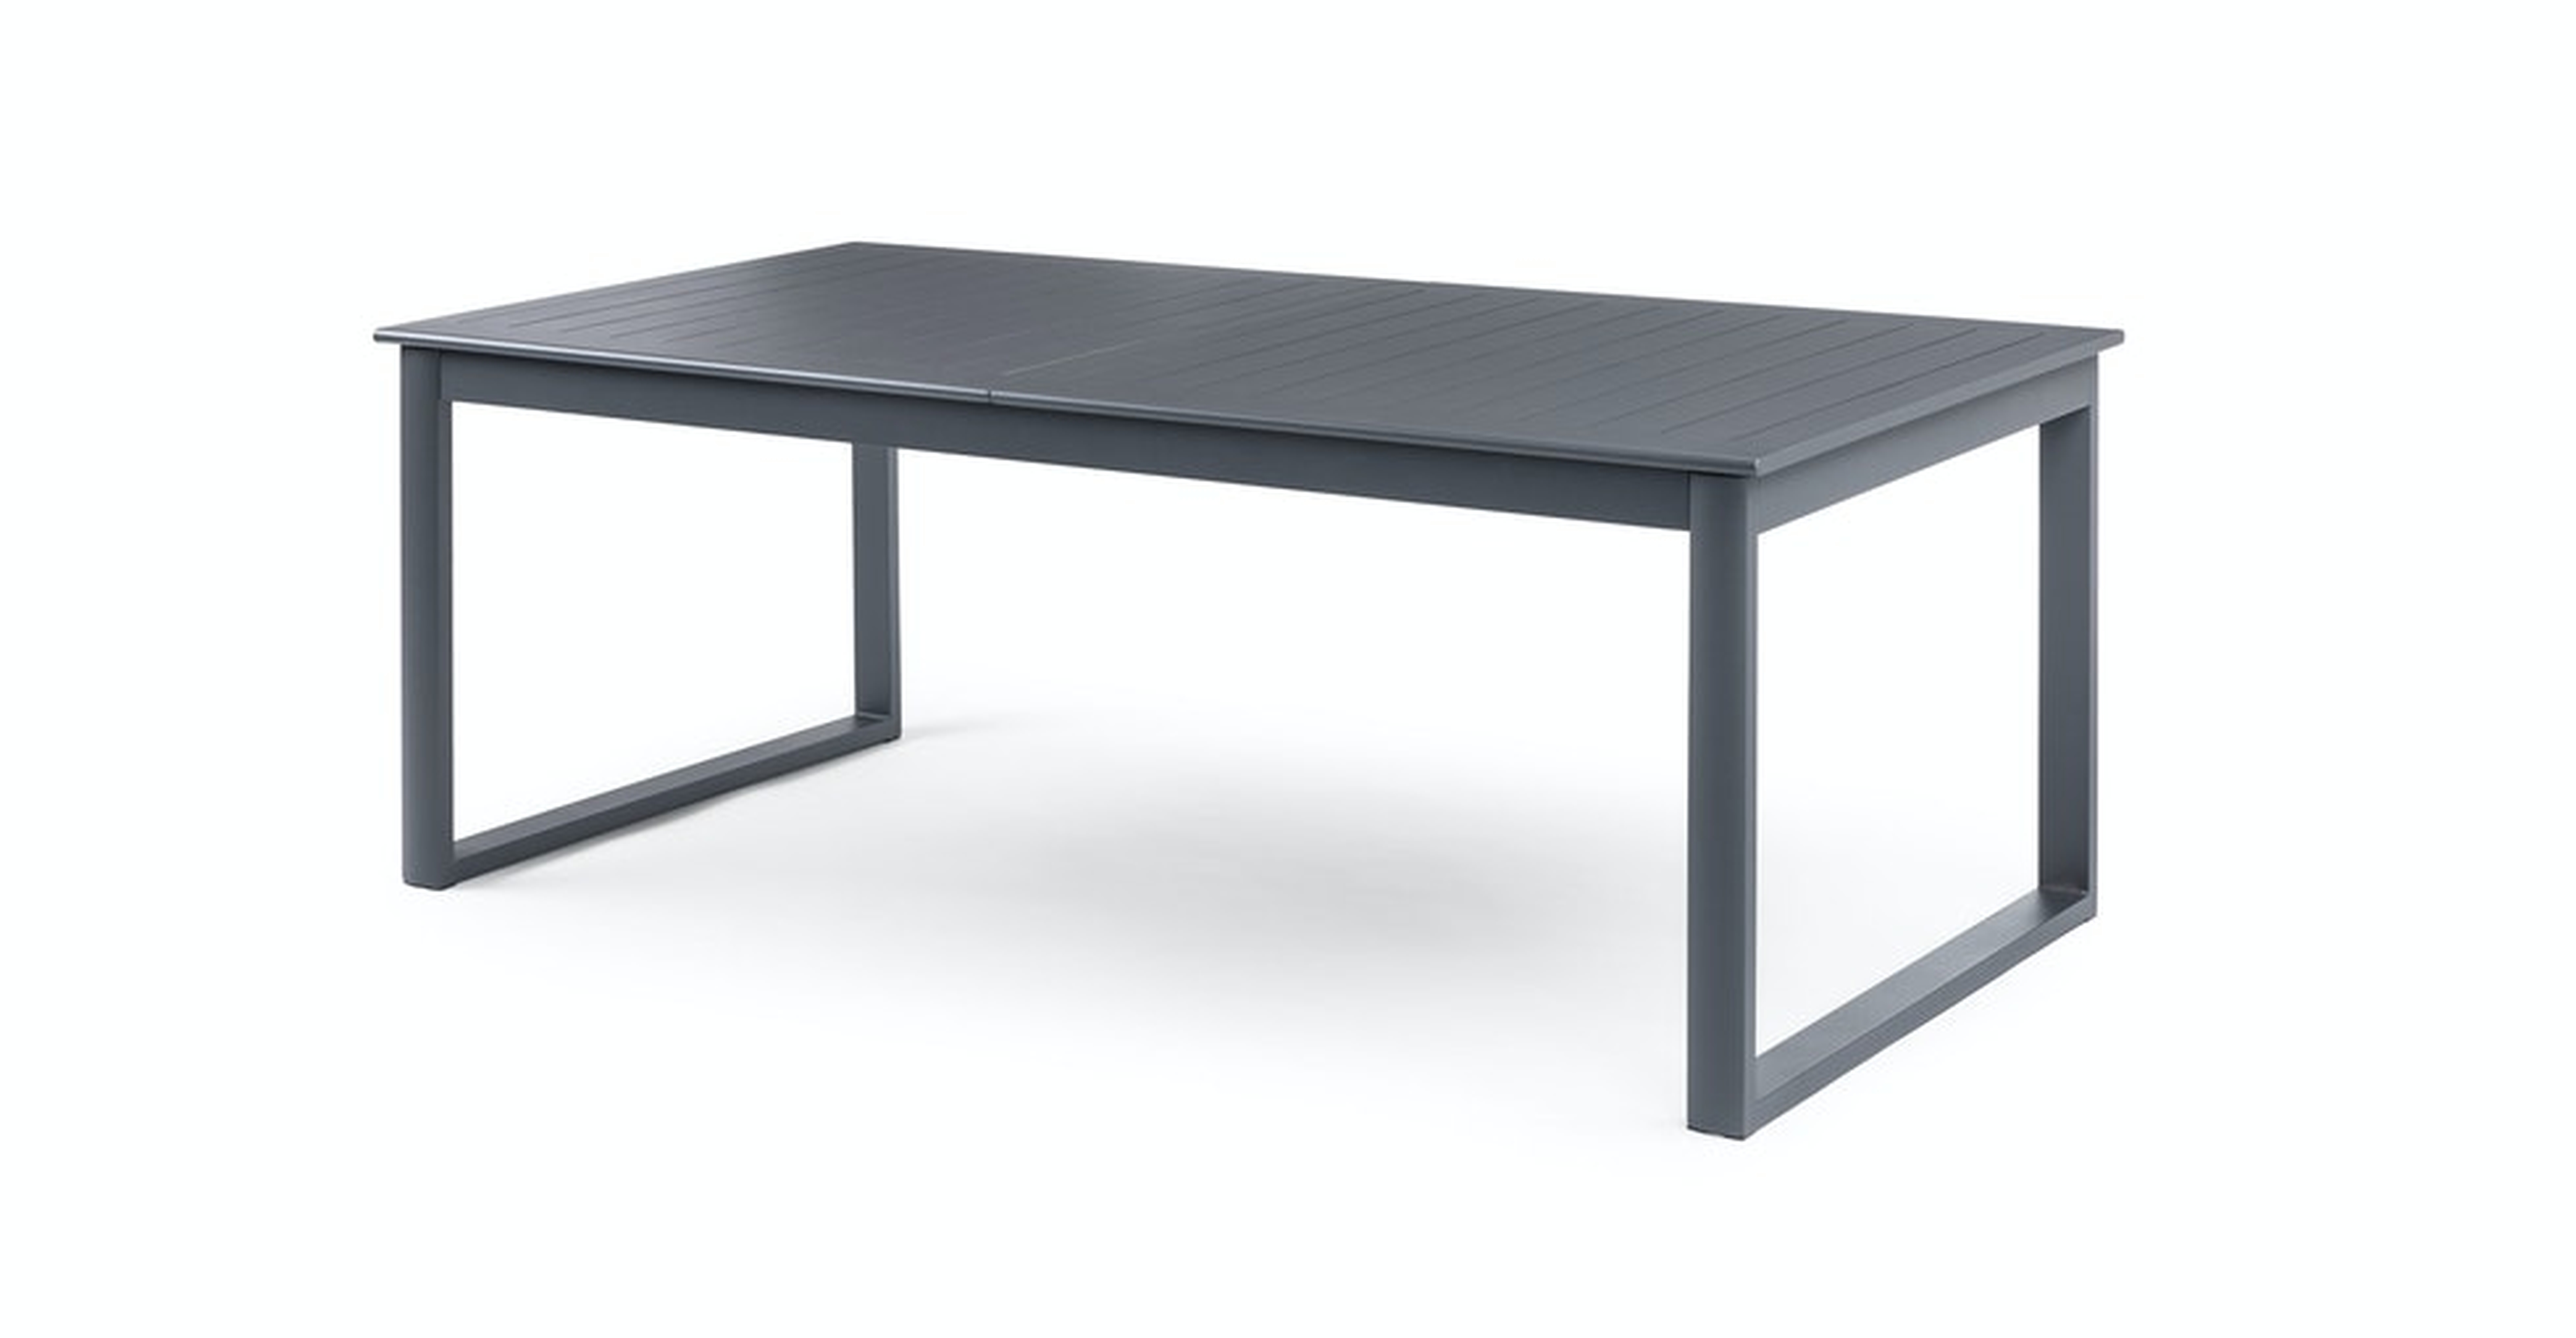 Ofer Dark Gray Table for 6, Extendable - Article